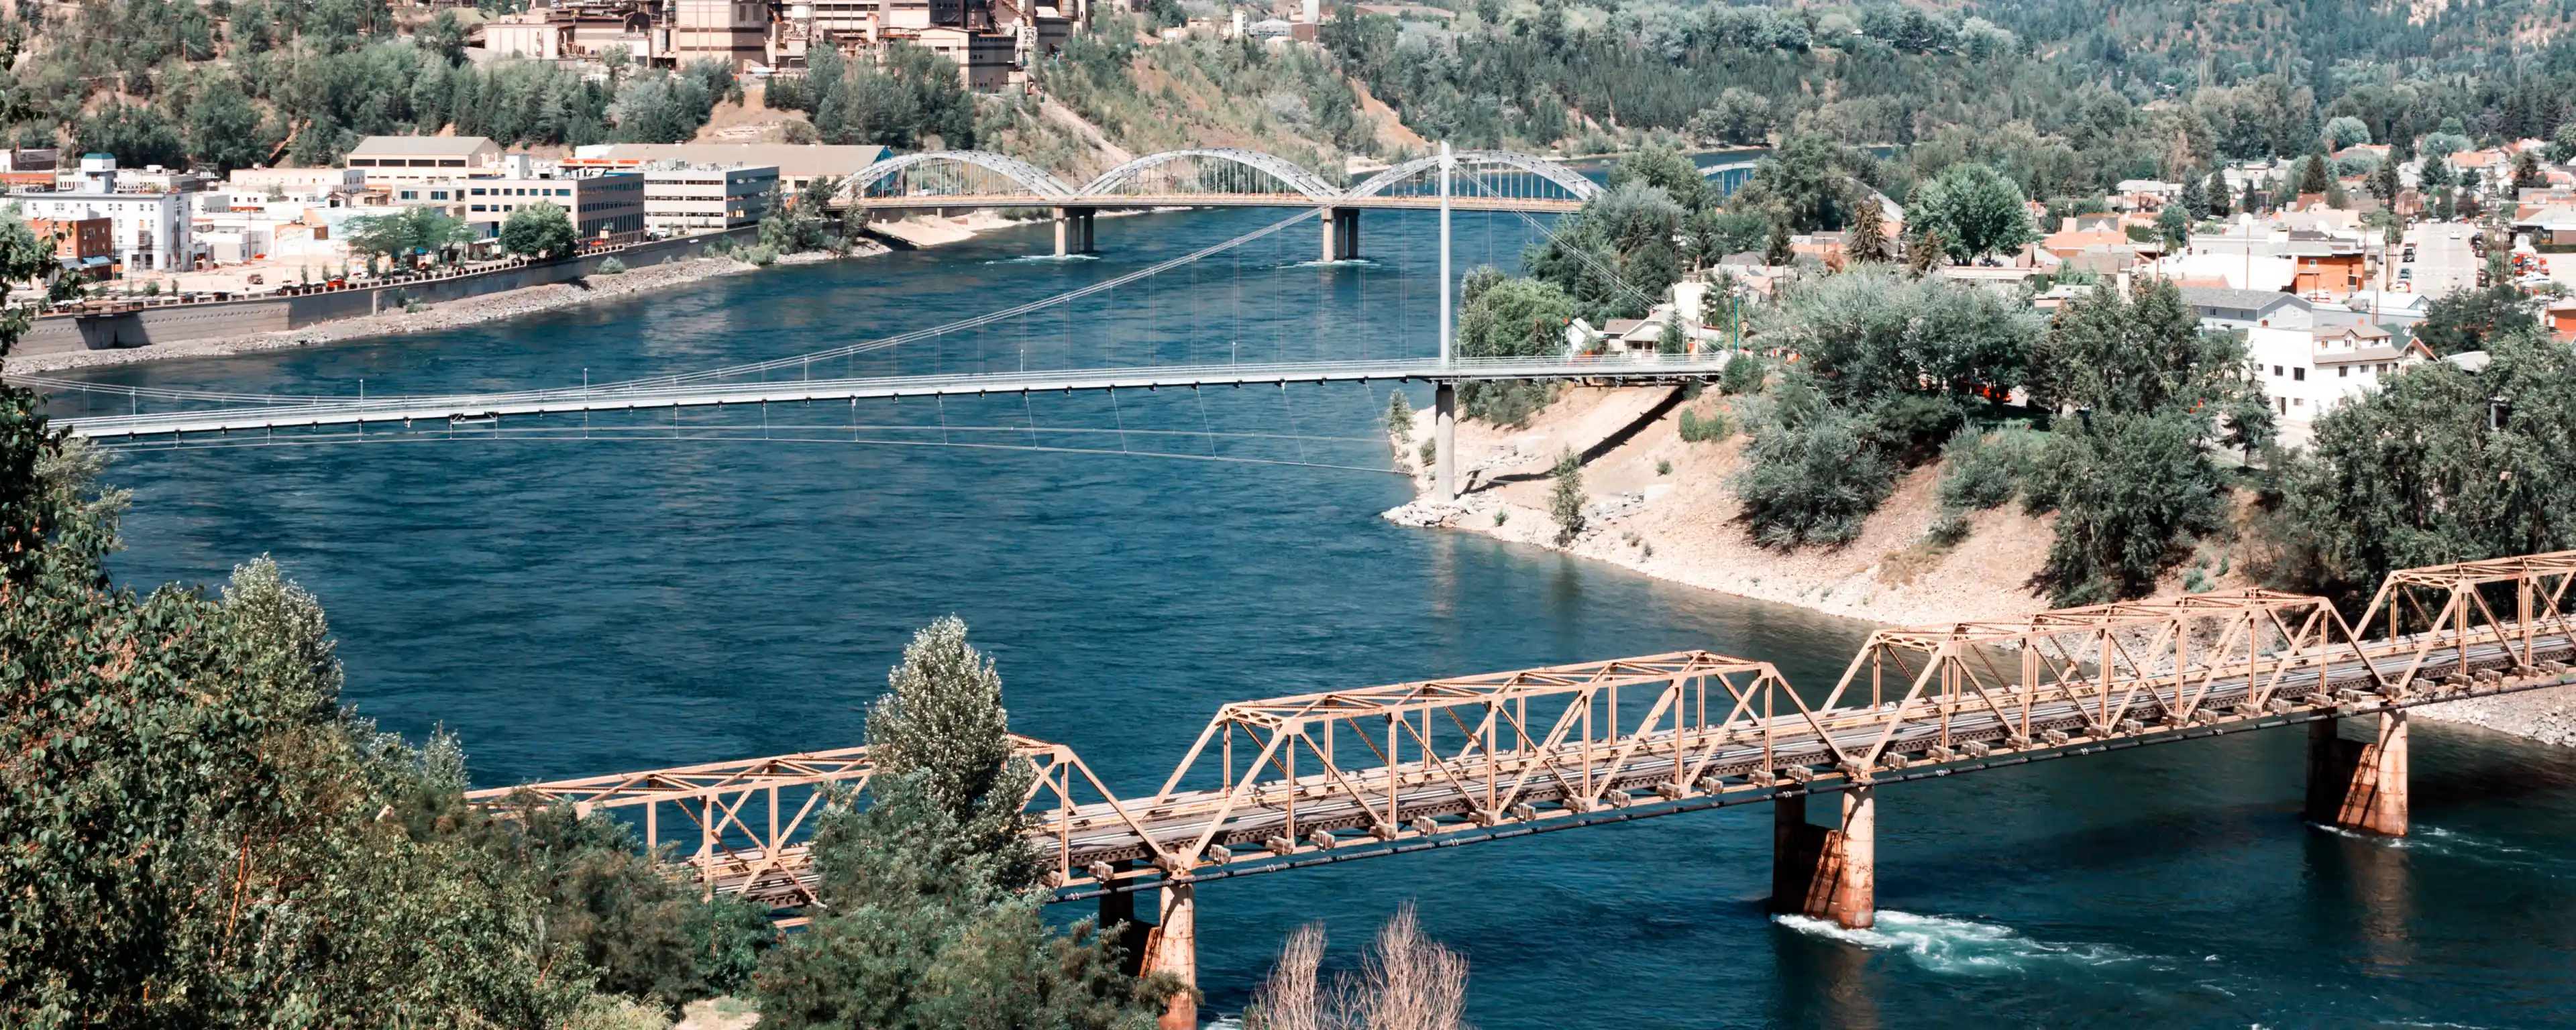 Aerial view of the Trail bridge in Trail, BC